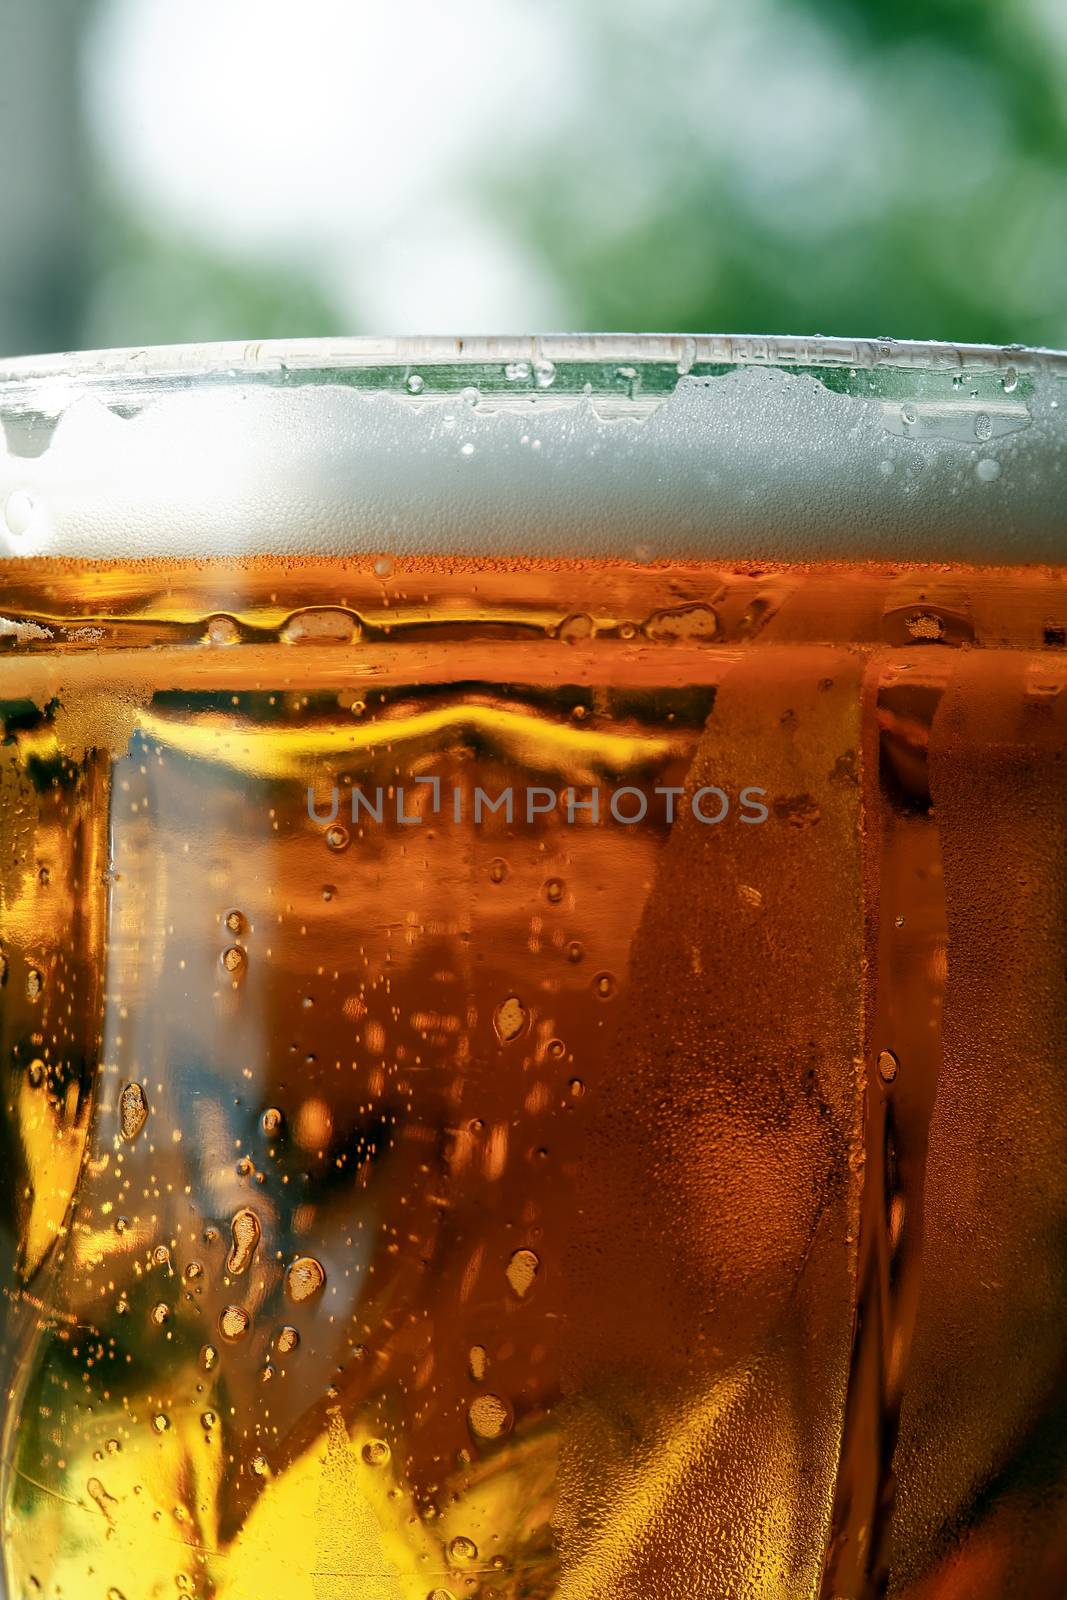 Cold Beer With Foam by kvkirillov